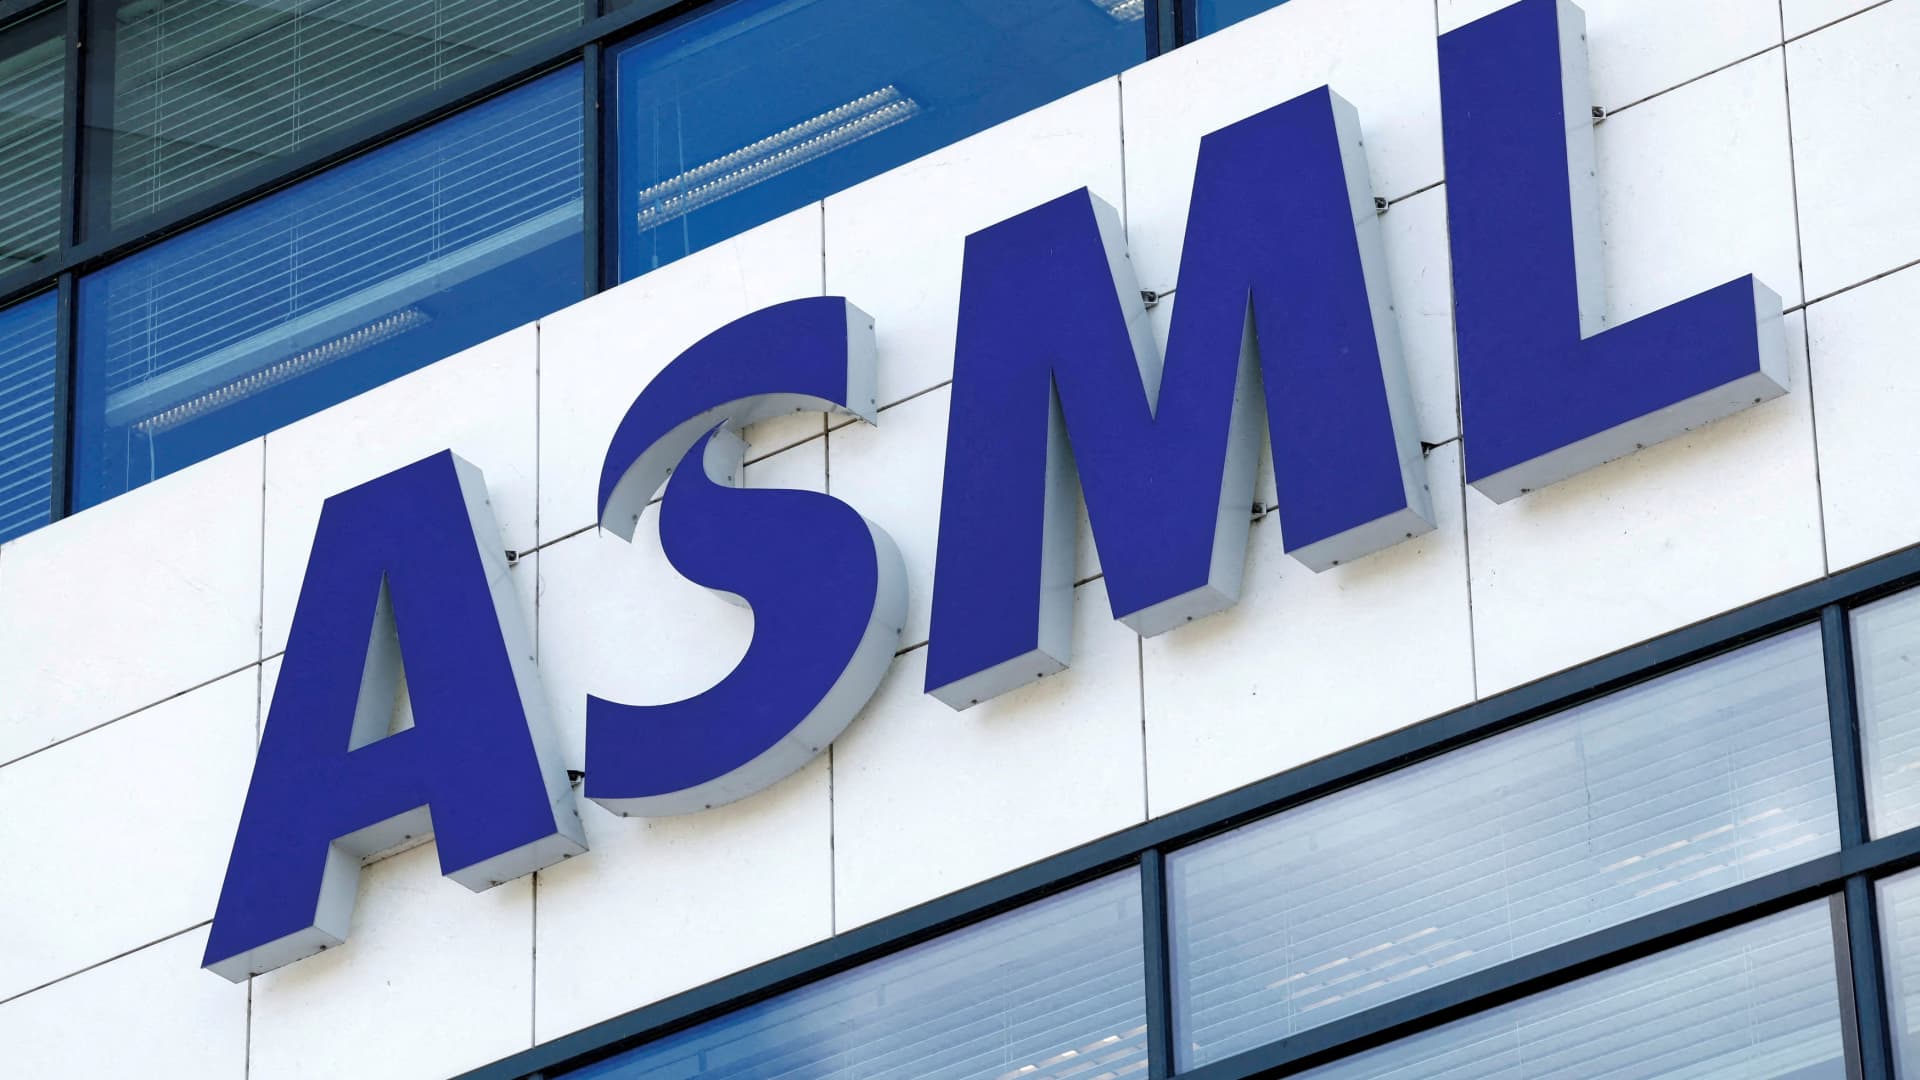 Dutch minister confident ‘crown jewel’ chip firm ASML will stay in Netherlands after threat to leave